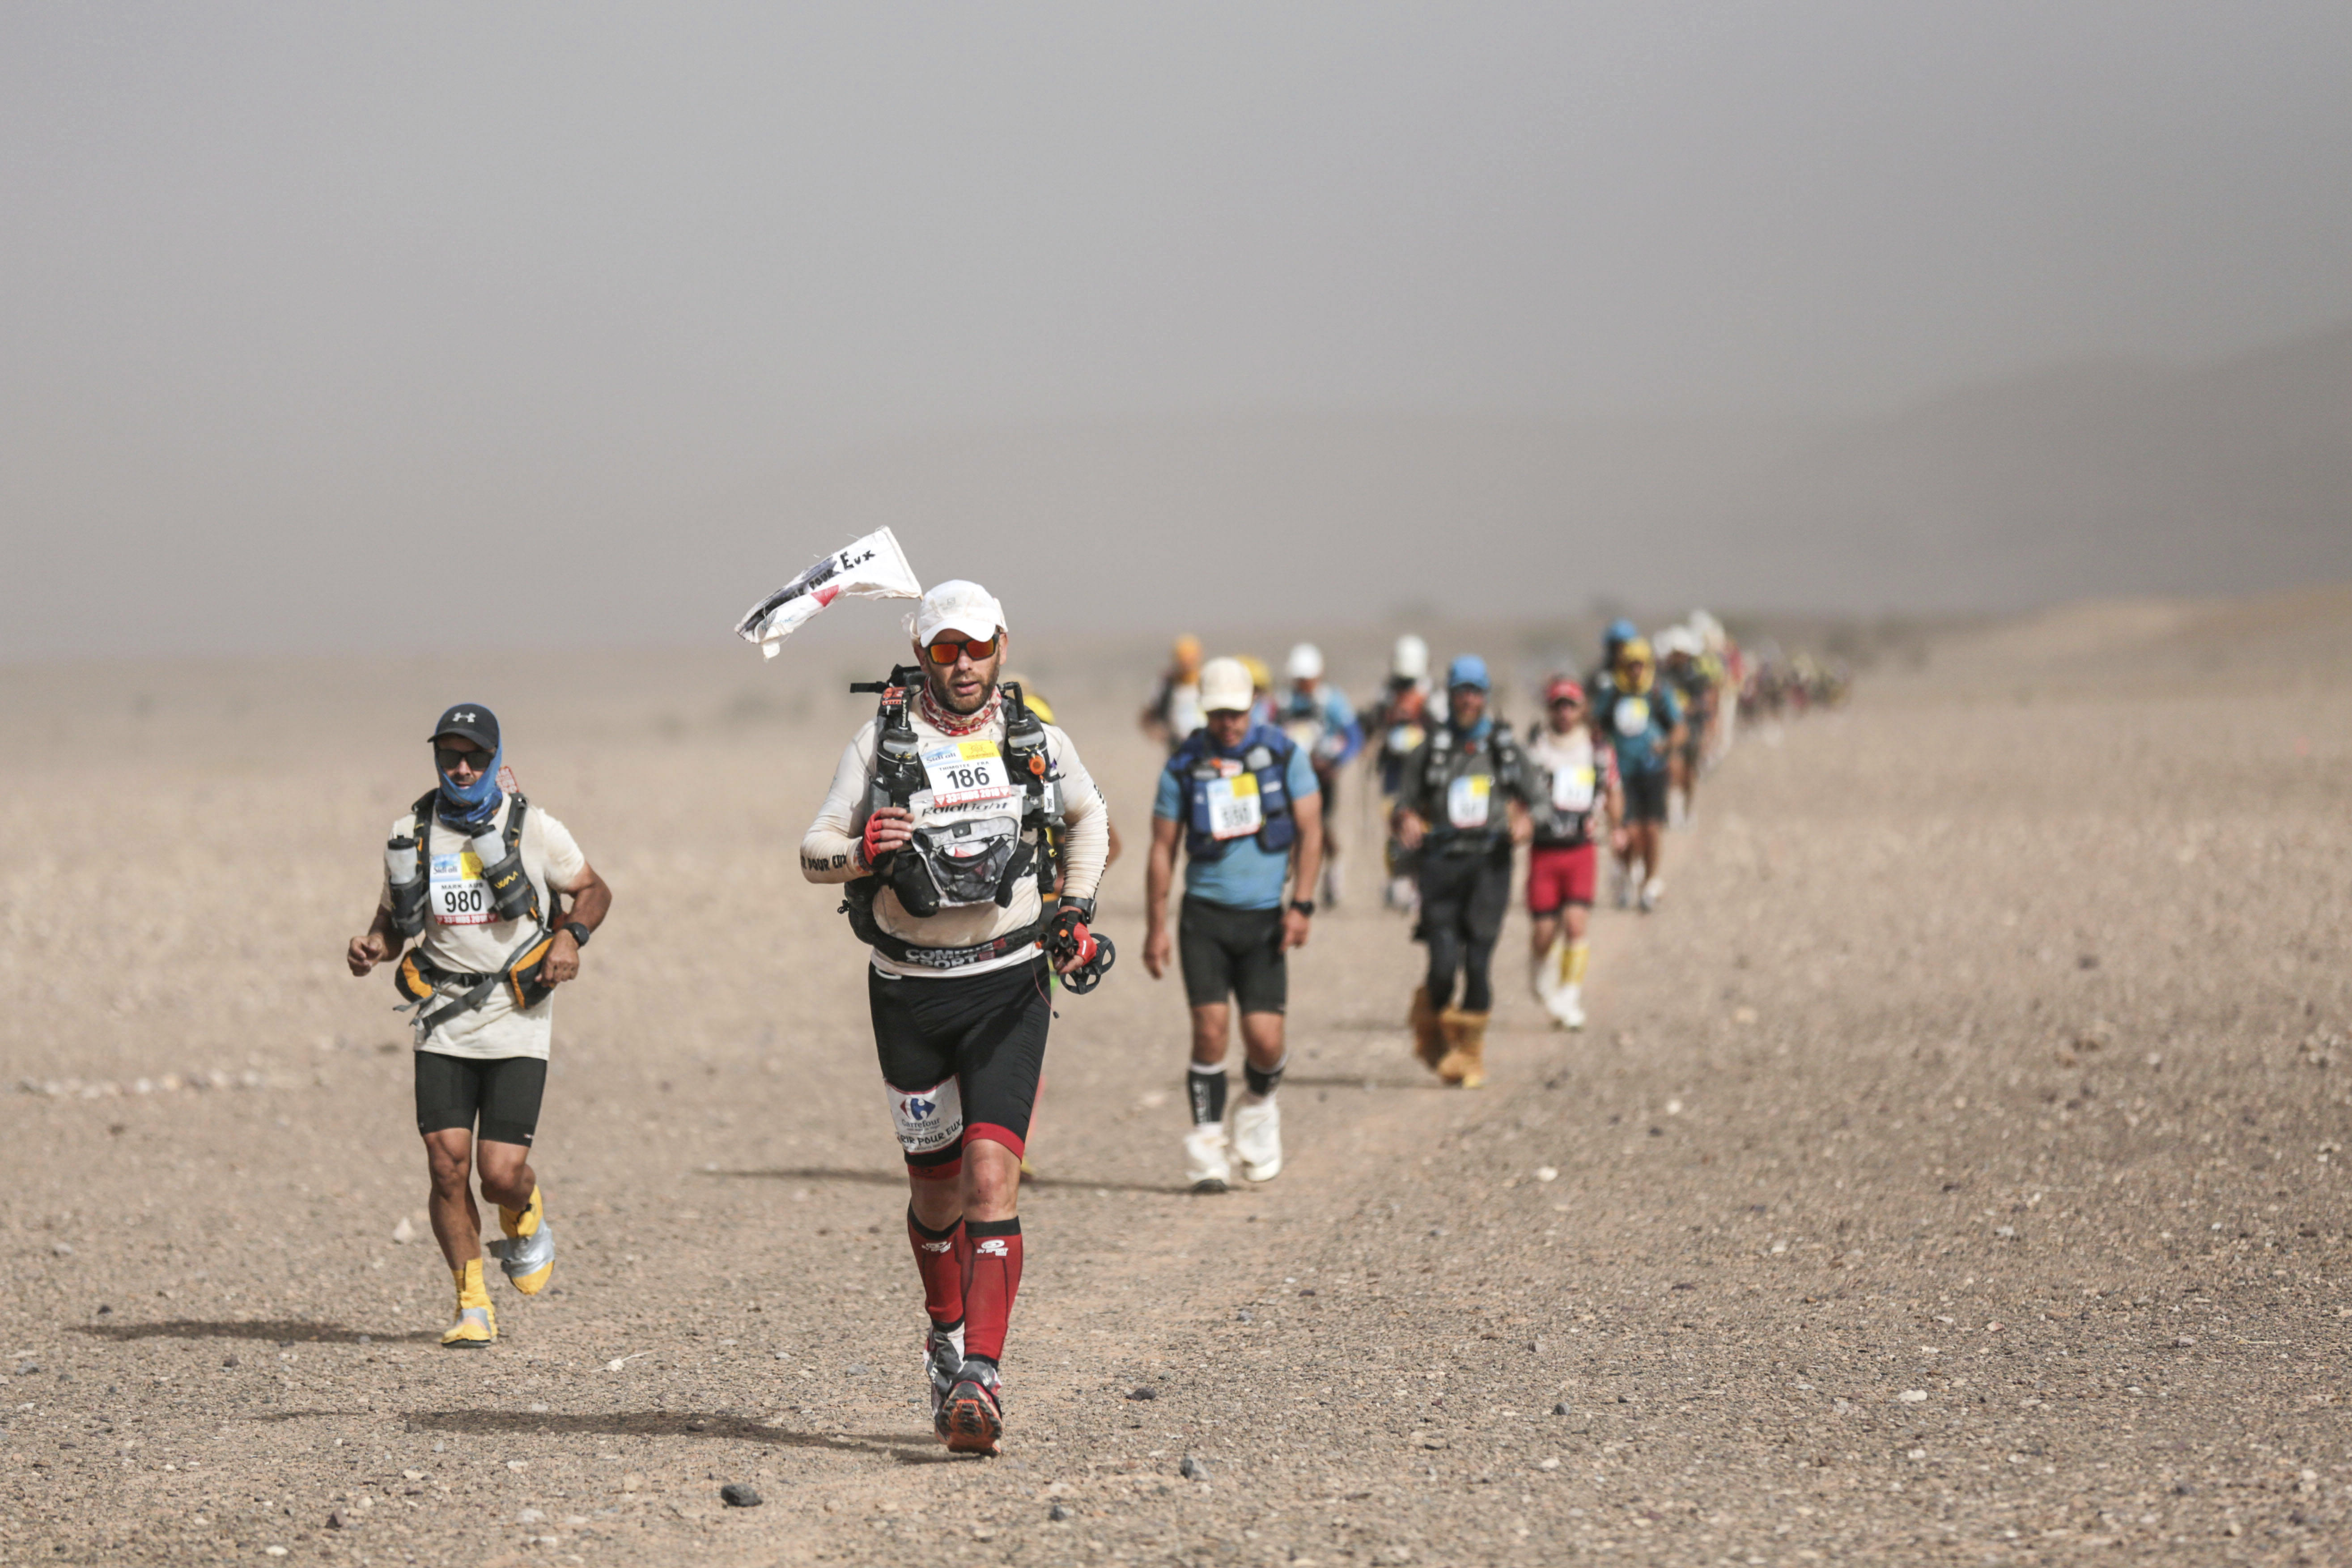 Competitors take part in stage 5 of the 33rd edition of Marathon des Sables, in the Sahara desert, near Merzouga, southern Morocco, Friday, April 13, 2018. The marathon, held every year in Morocco, is a 250-km ultra-trail that takes part over 6 stages in extremely grueling conditions. (AP Photo/Mosa'ab Elshamy)